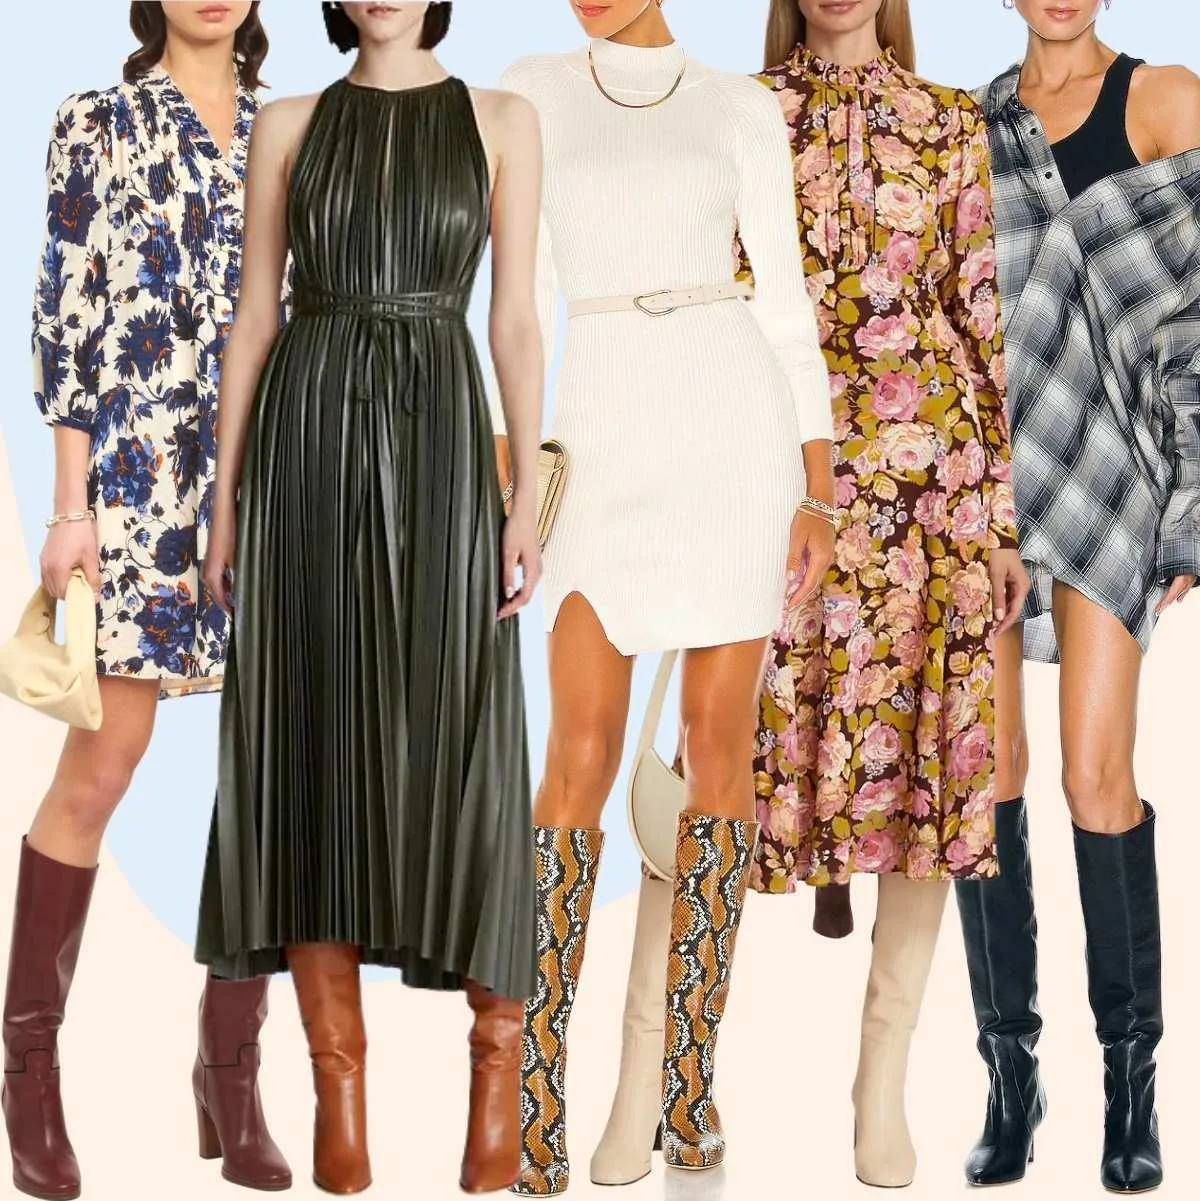 Collage of 5 women wearing different knee high boots with dresses.